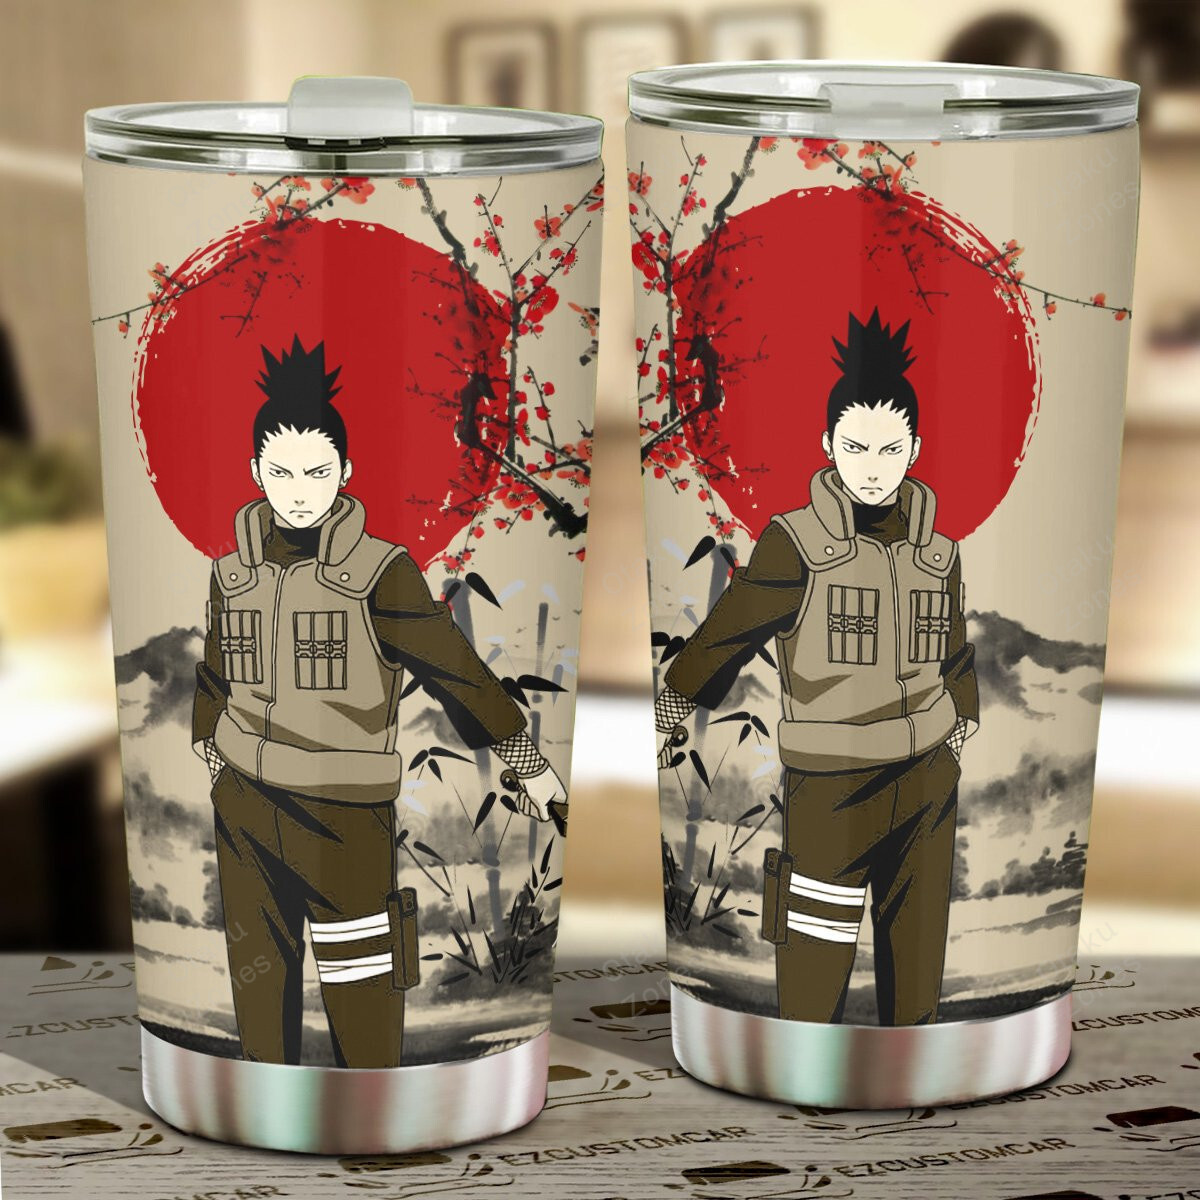 Go ahead and order your new tumbler now! 55